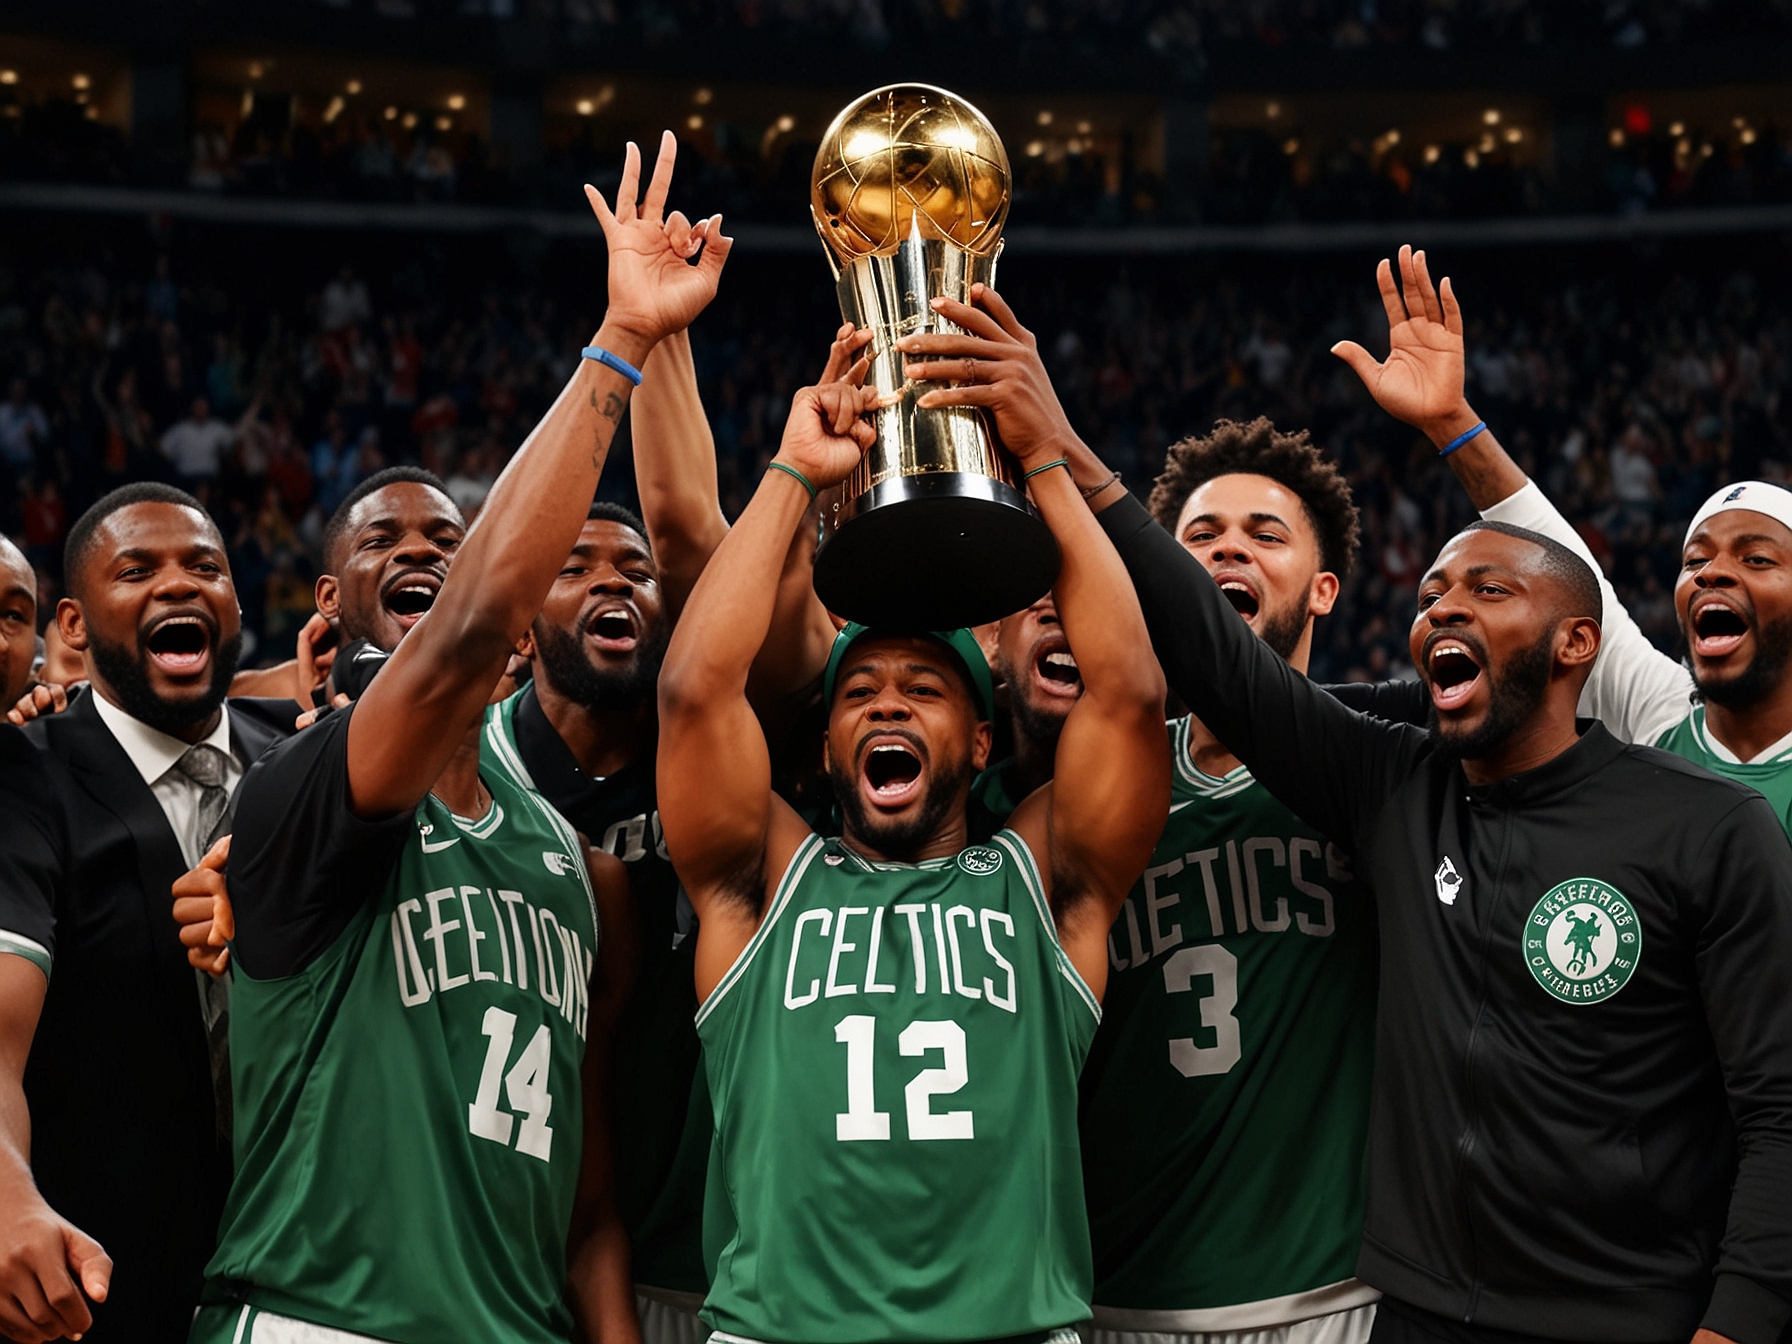 The Boston Celtics celebrate on the court as the final buzzer sounds, capturing the joy and excitement of winning their 18th NBA championship title.